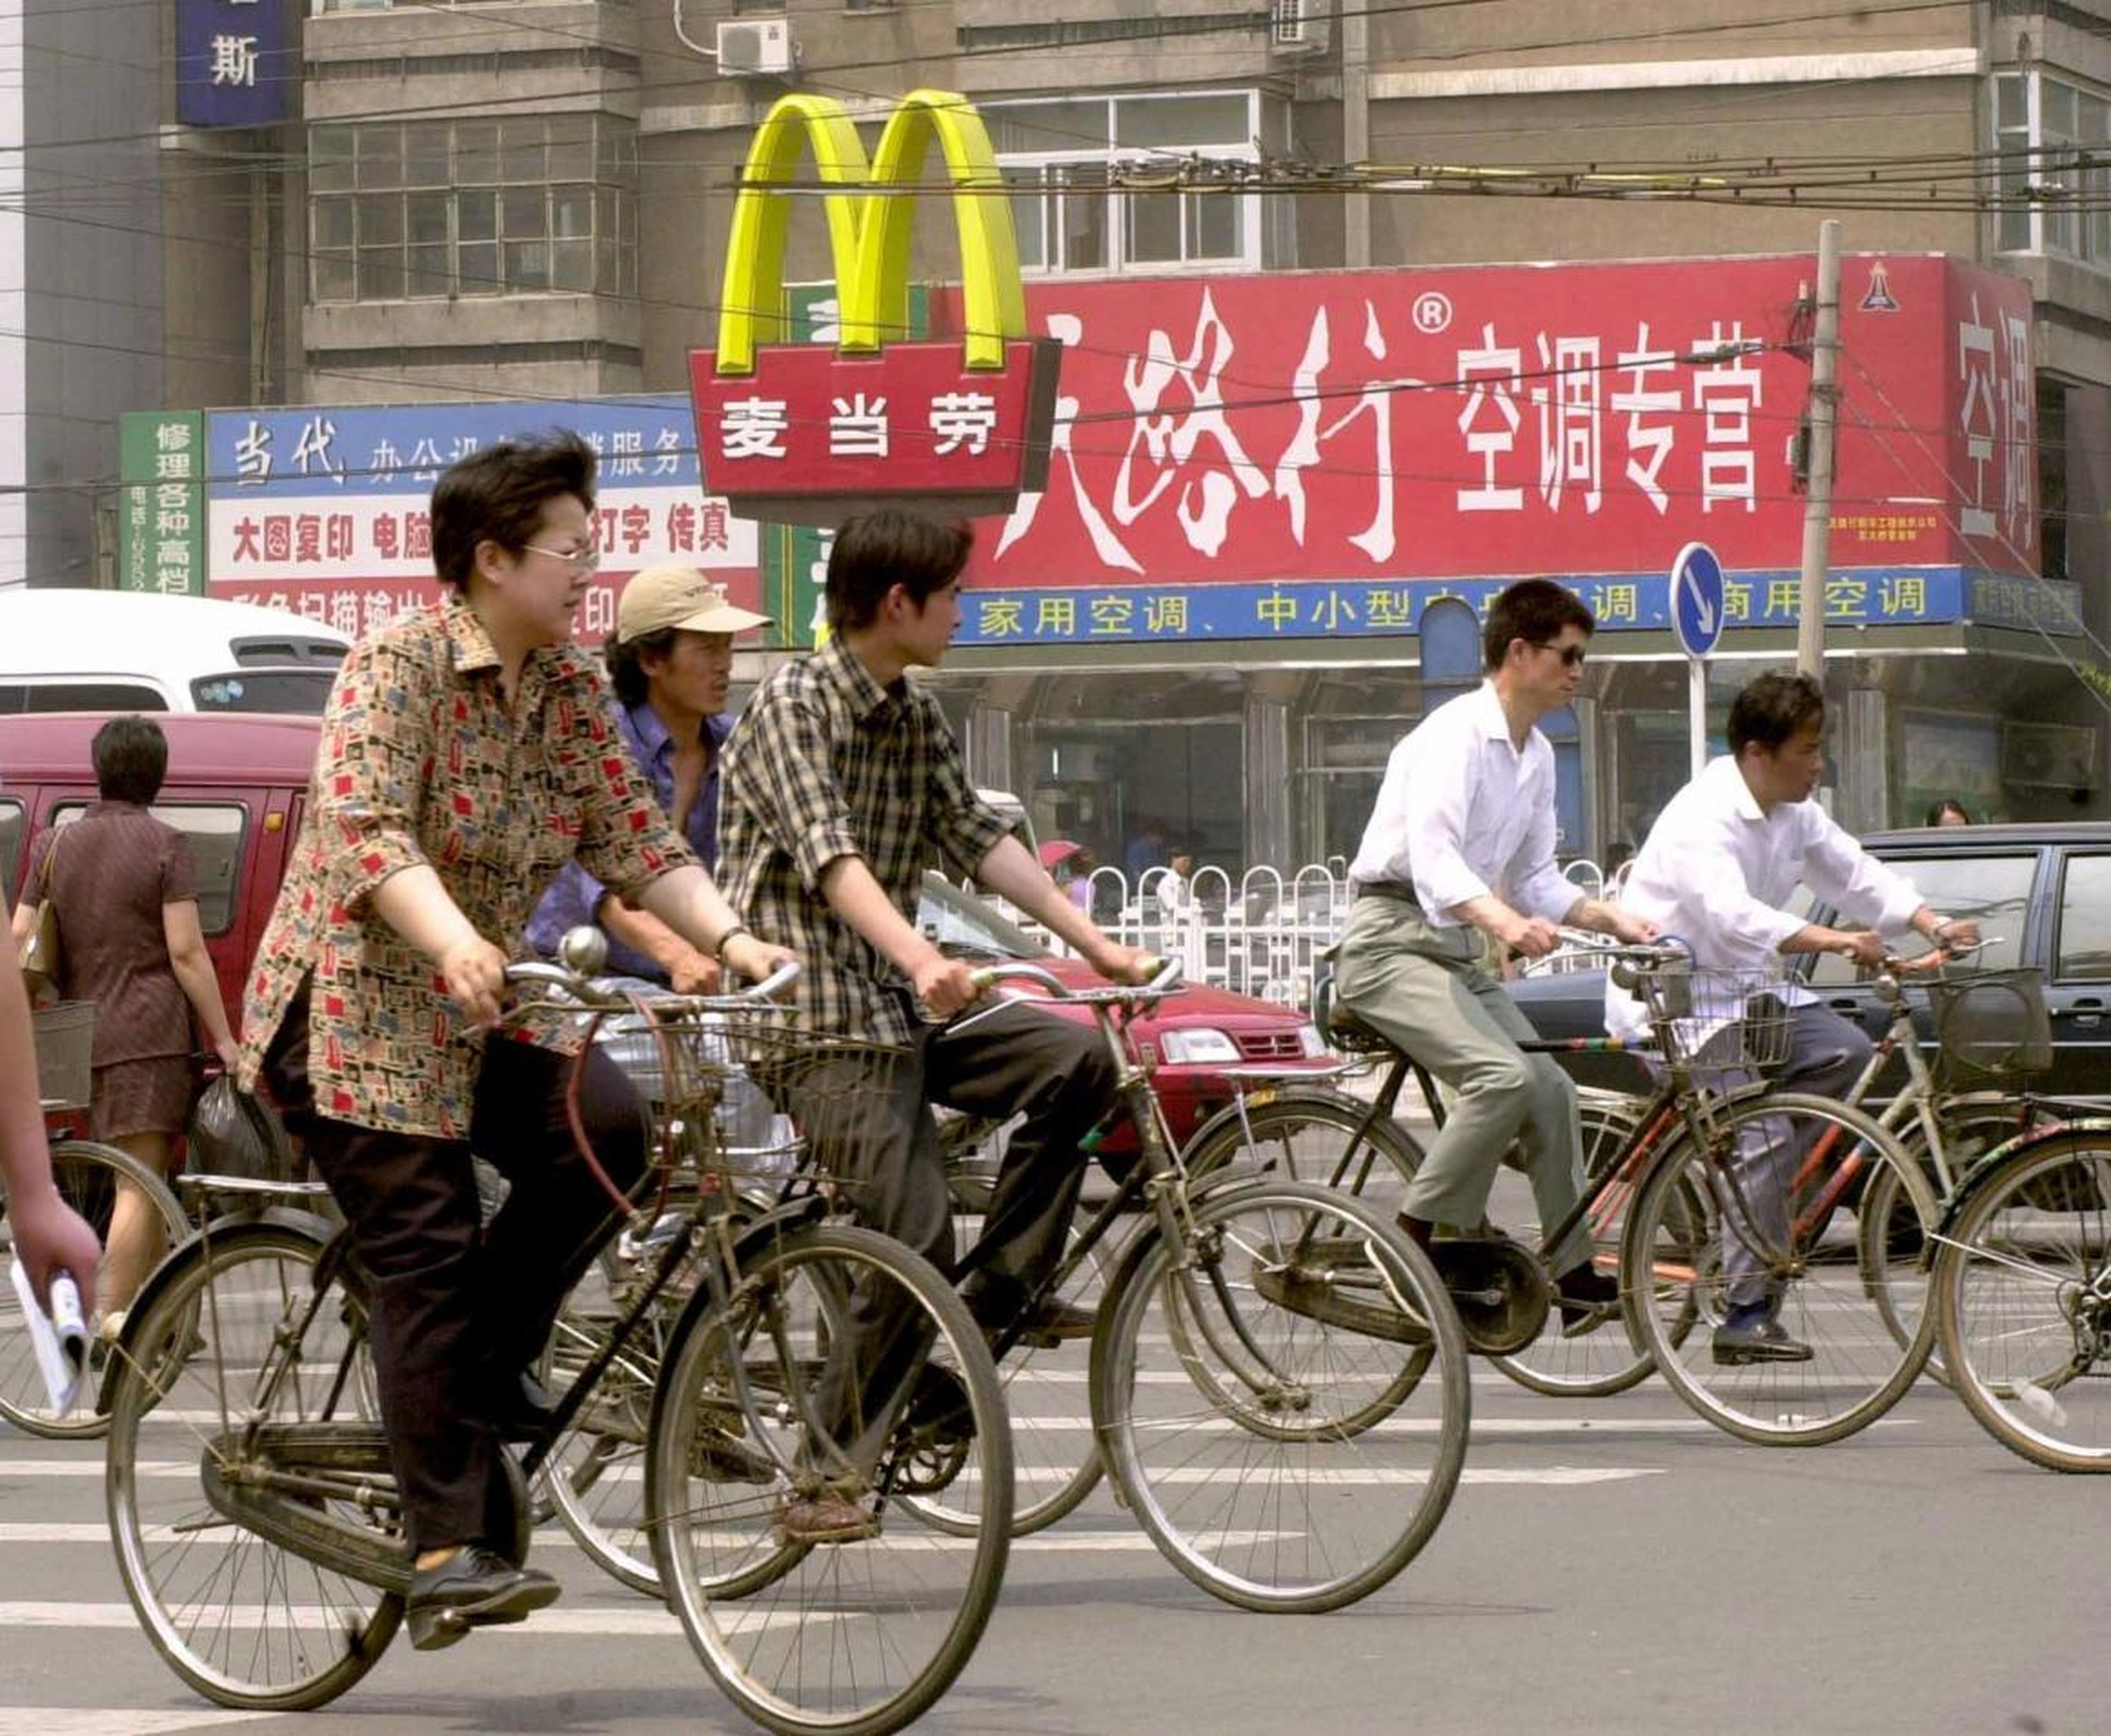 McDonald's recently announced plans to double its presence in China within the next five years.